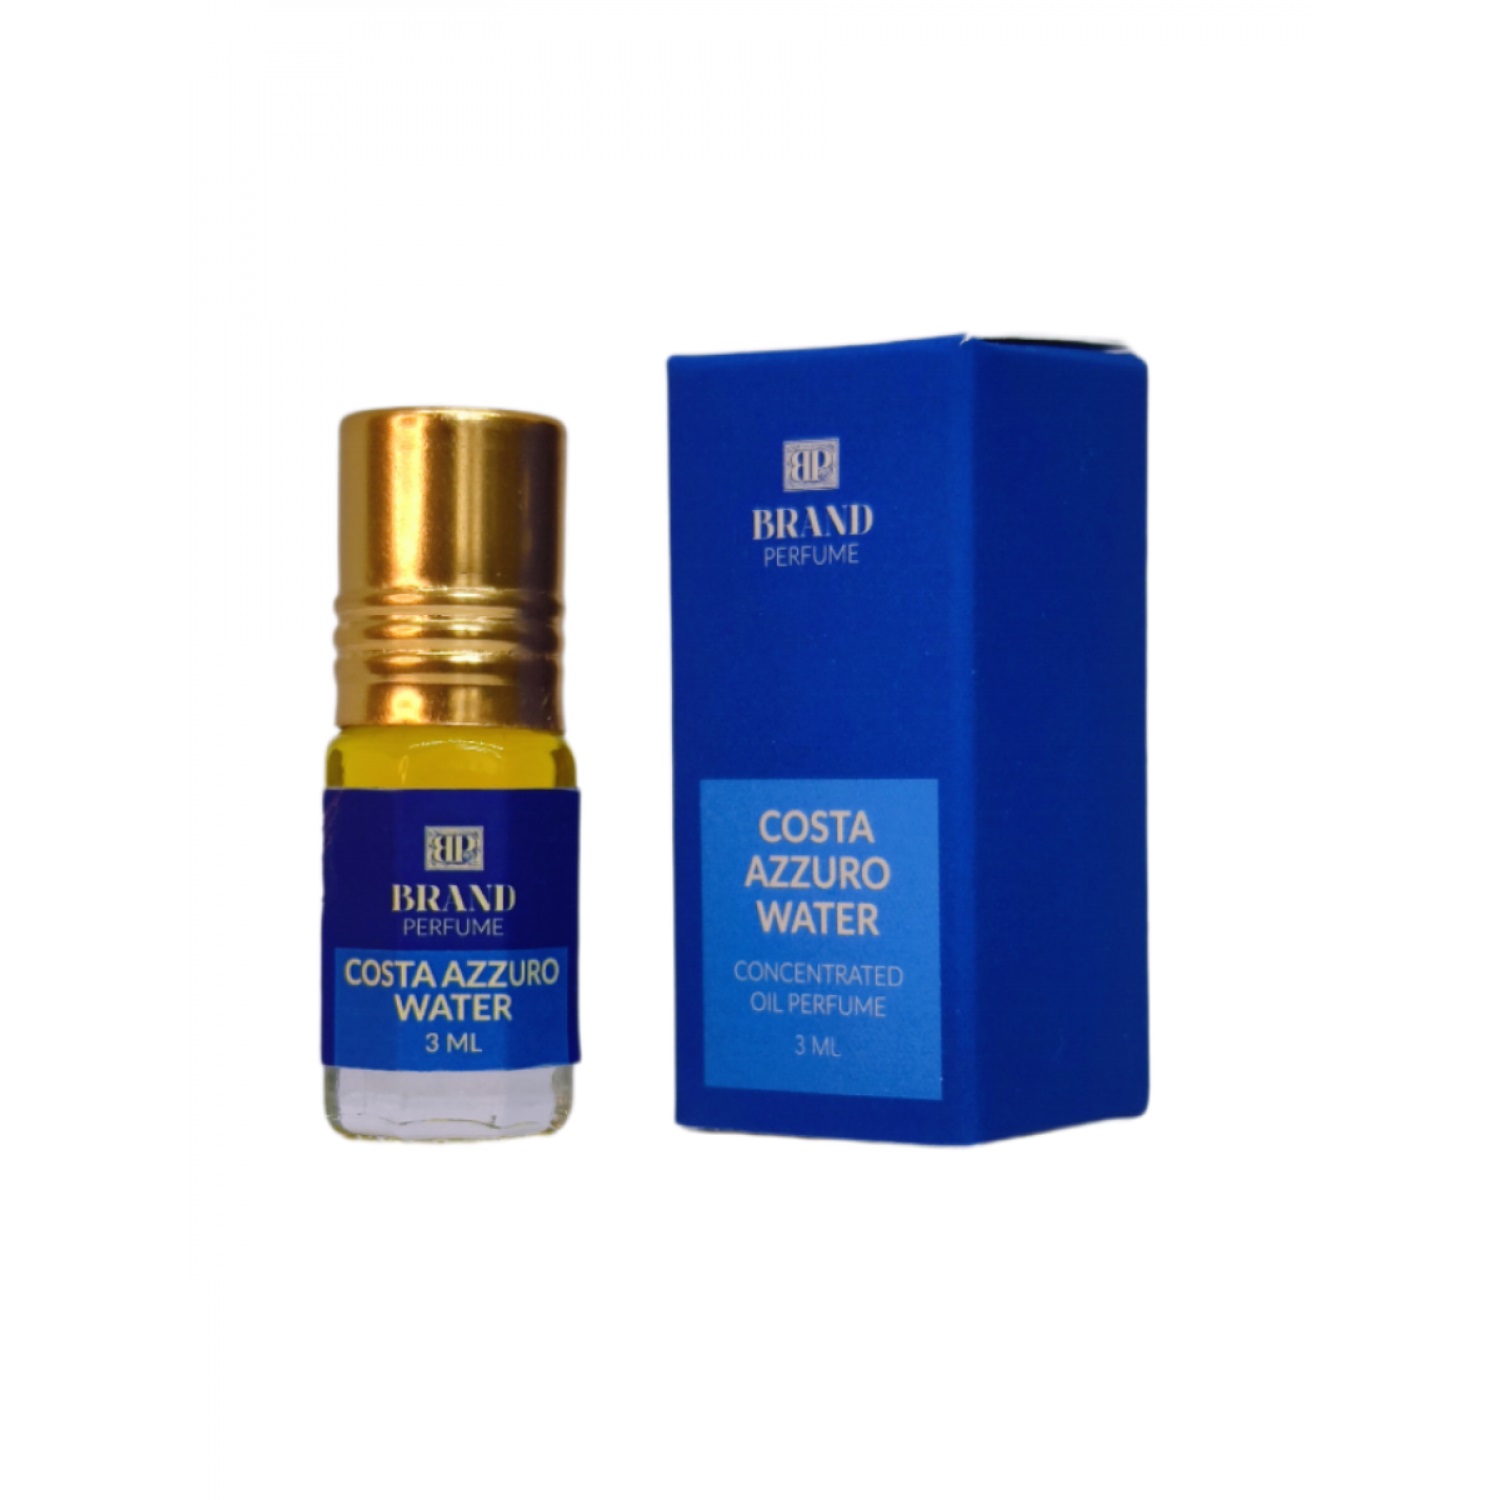 COSTA AZZURO WATER Concentrated Oil Perfume, Brand Perfume (КОСТА АЗЗУРА АКВА Концентрированные масляные духи), ролик, 3 мл.